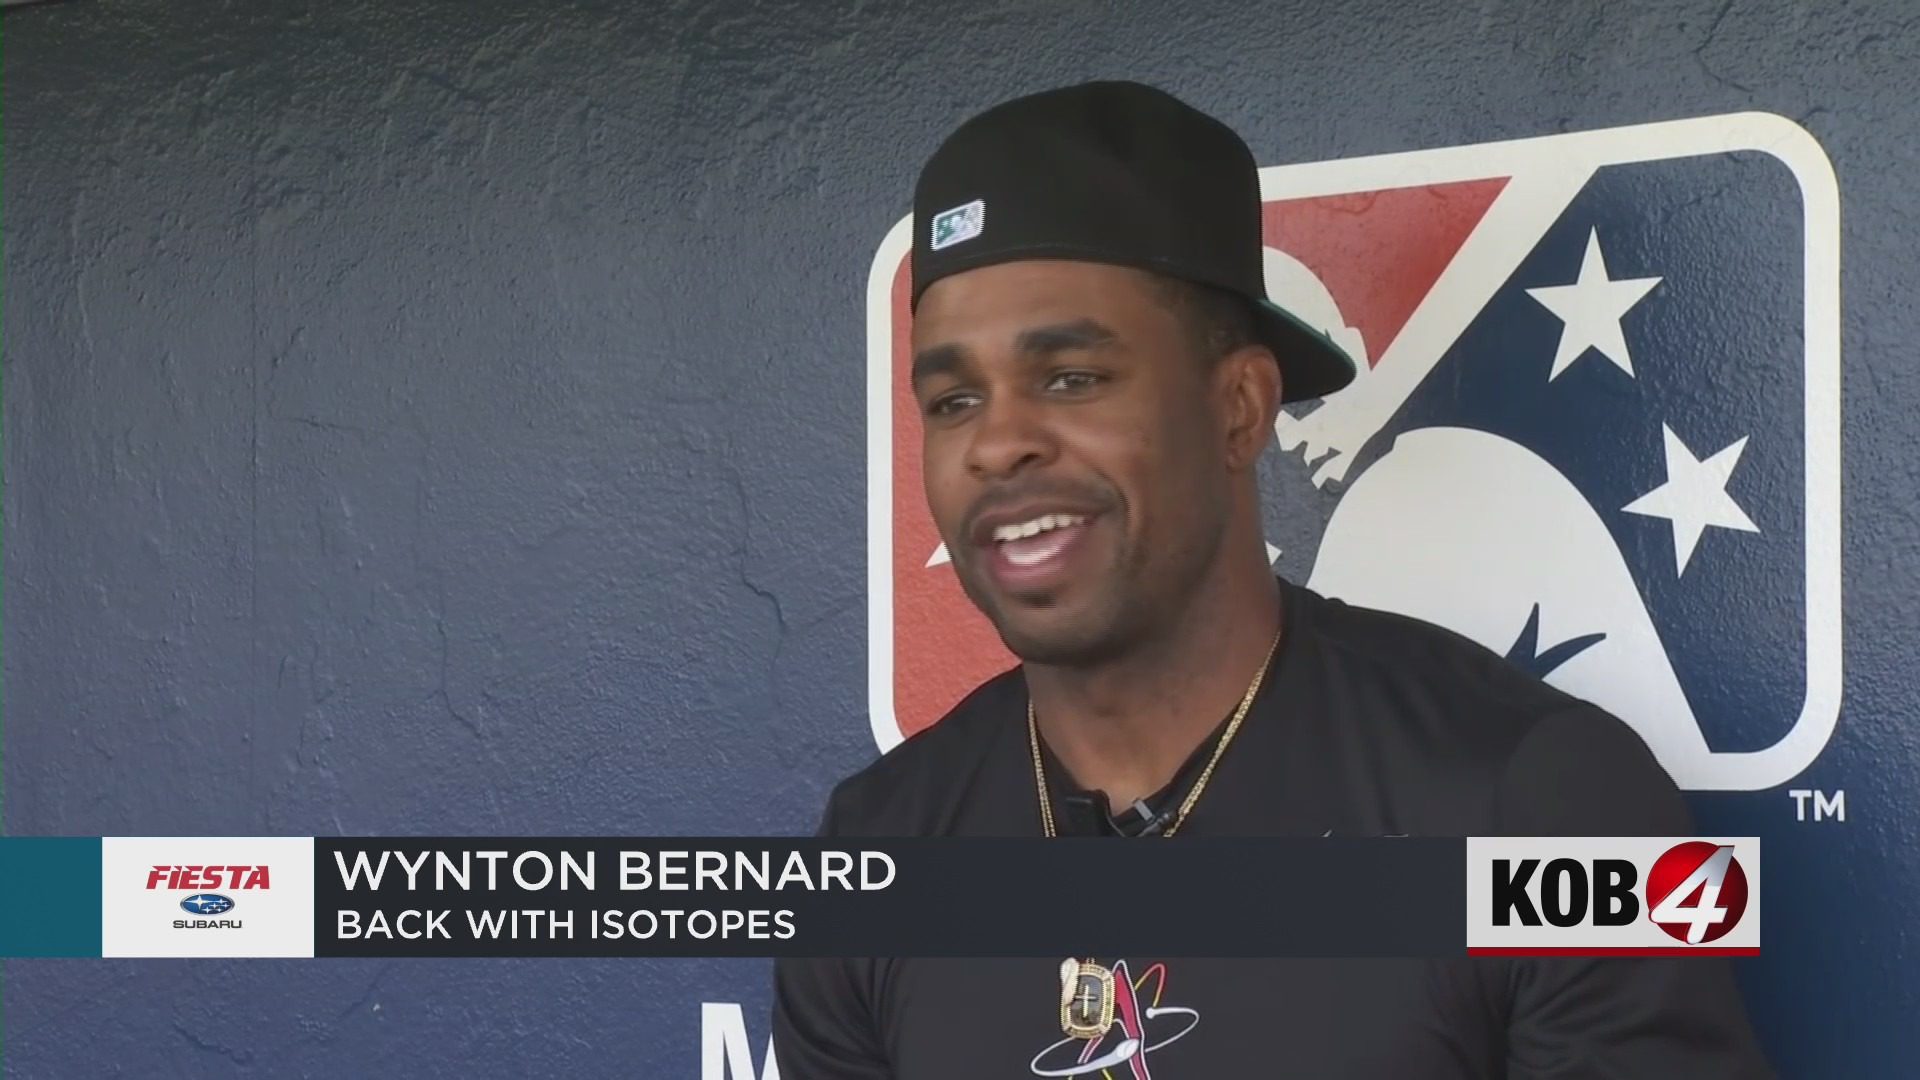 Wynton Bernard happy to be back with Isotopes ahead of OKC duel 